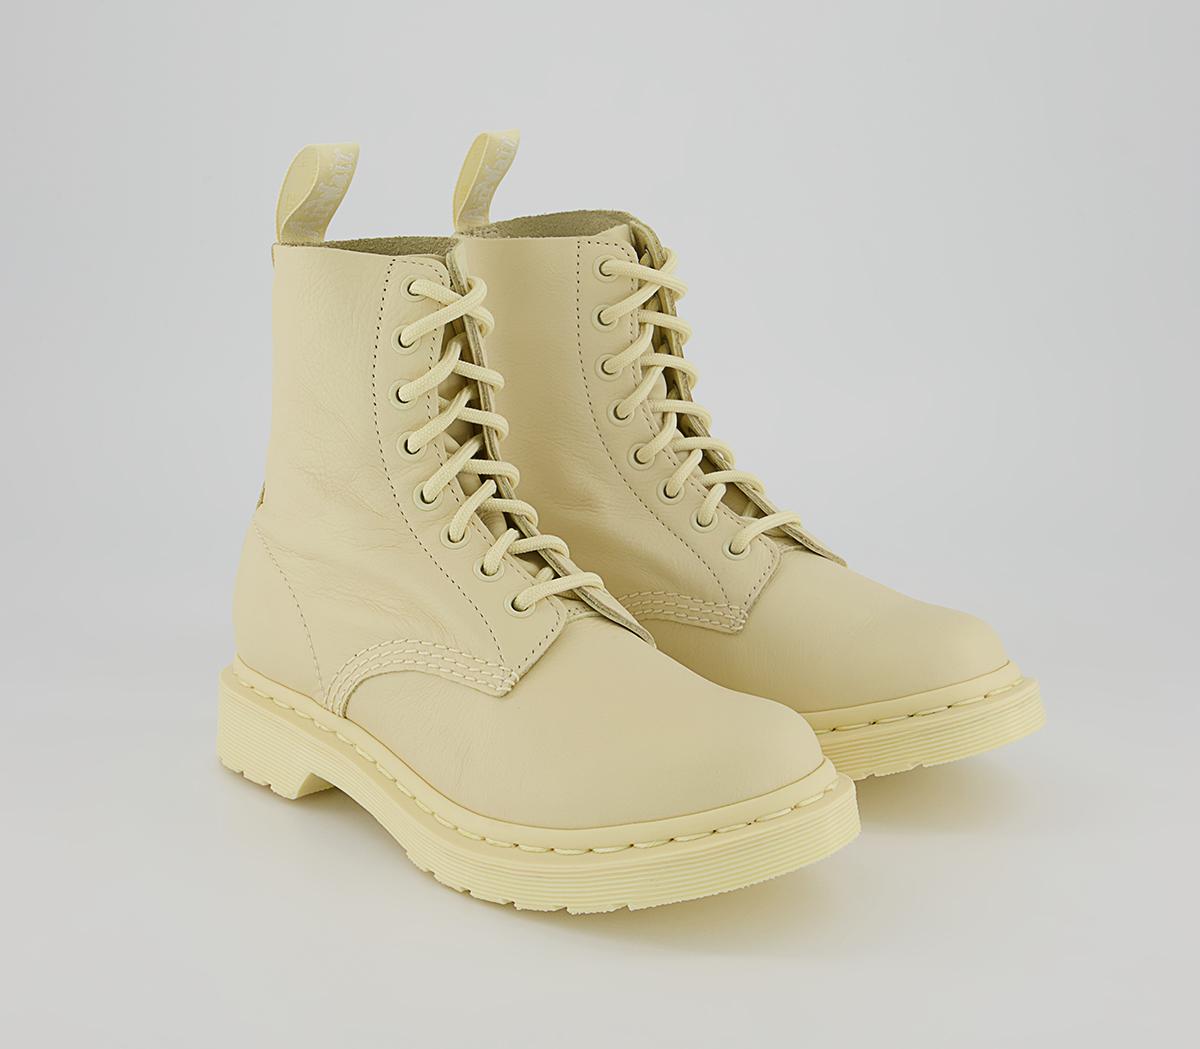 Dr. Martens 8 Eyelet Lace Up Boots Toile Cream Virginia - Women's Ankle ...